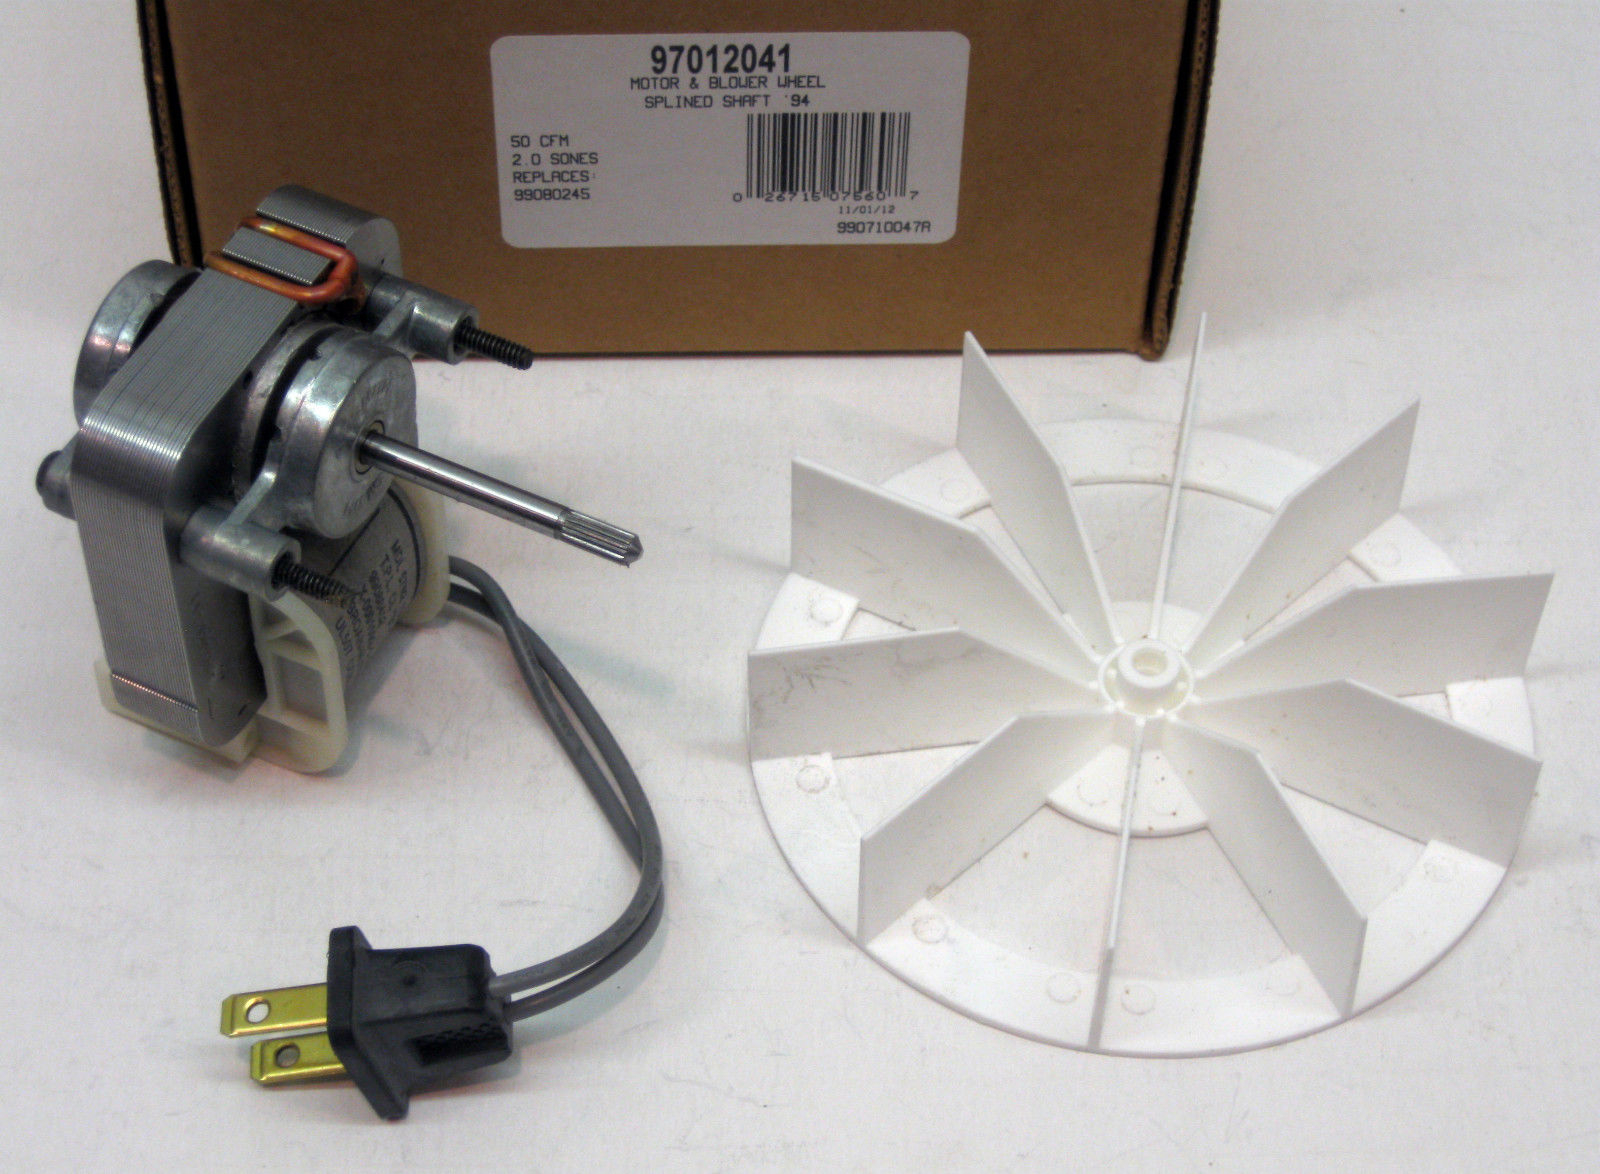 Broan Bathroom Fan Replacement Motor Image Of Bathroom And in proportions 1600 X 1174